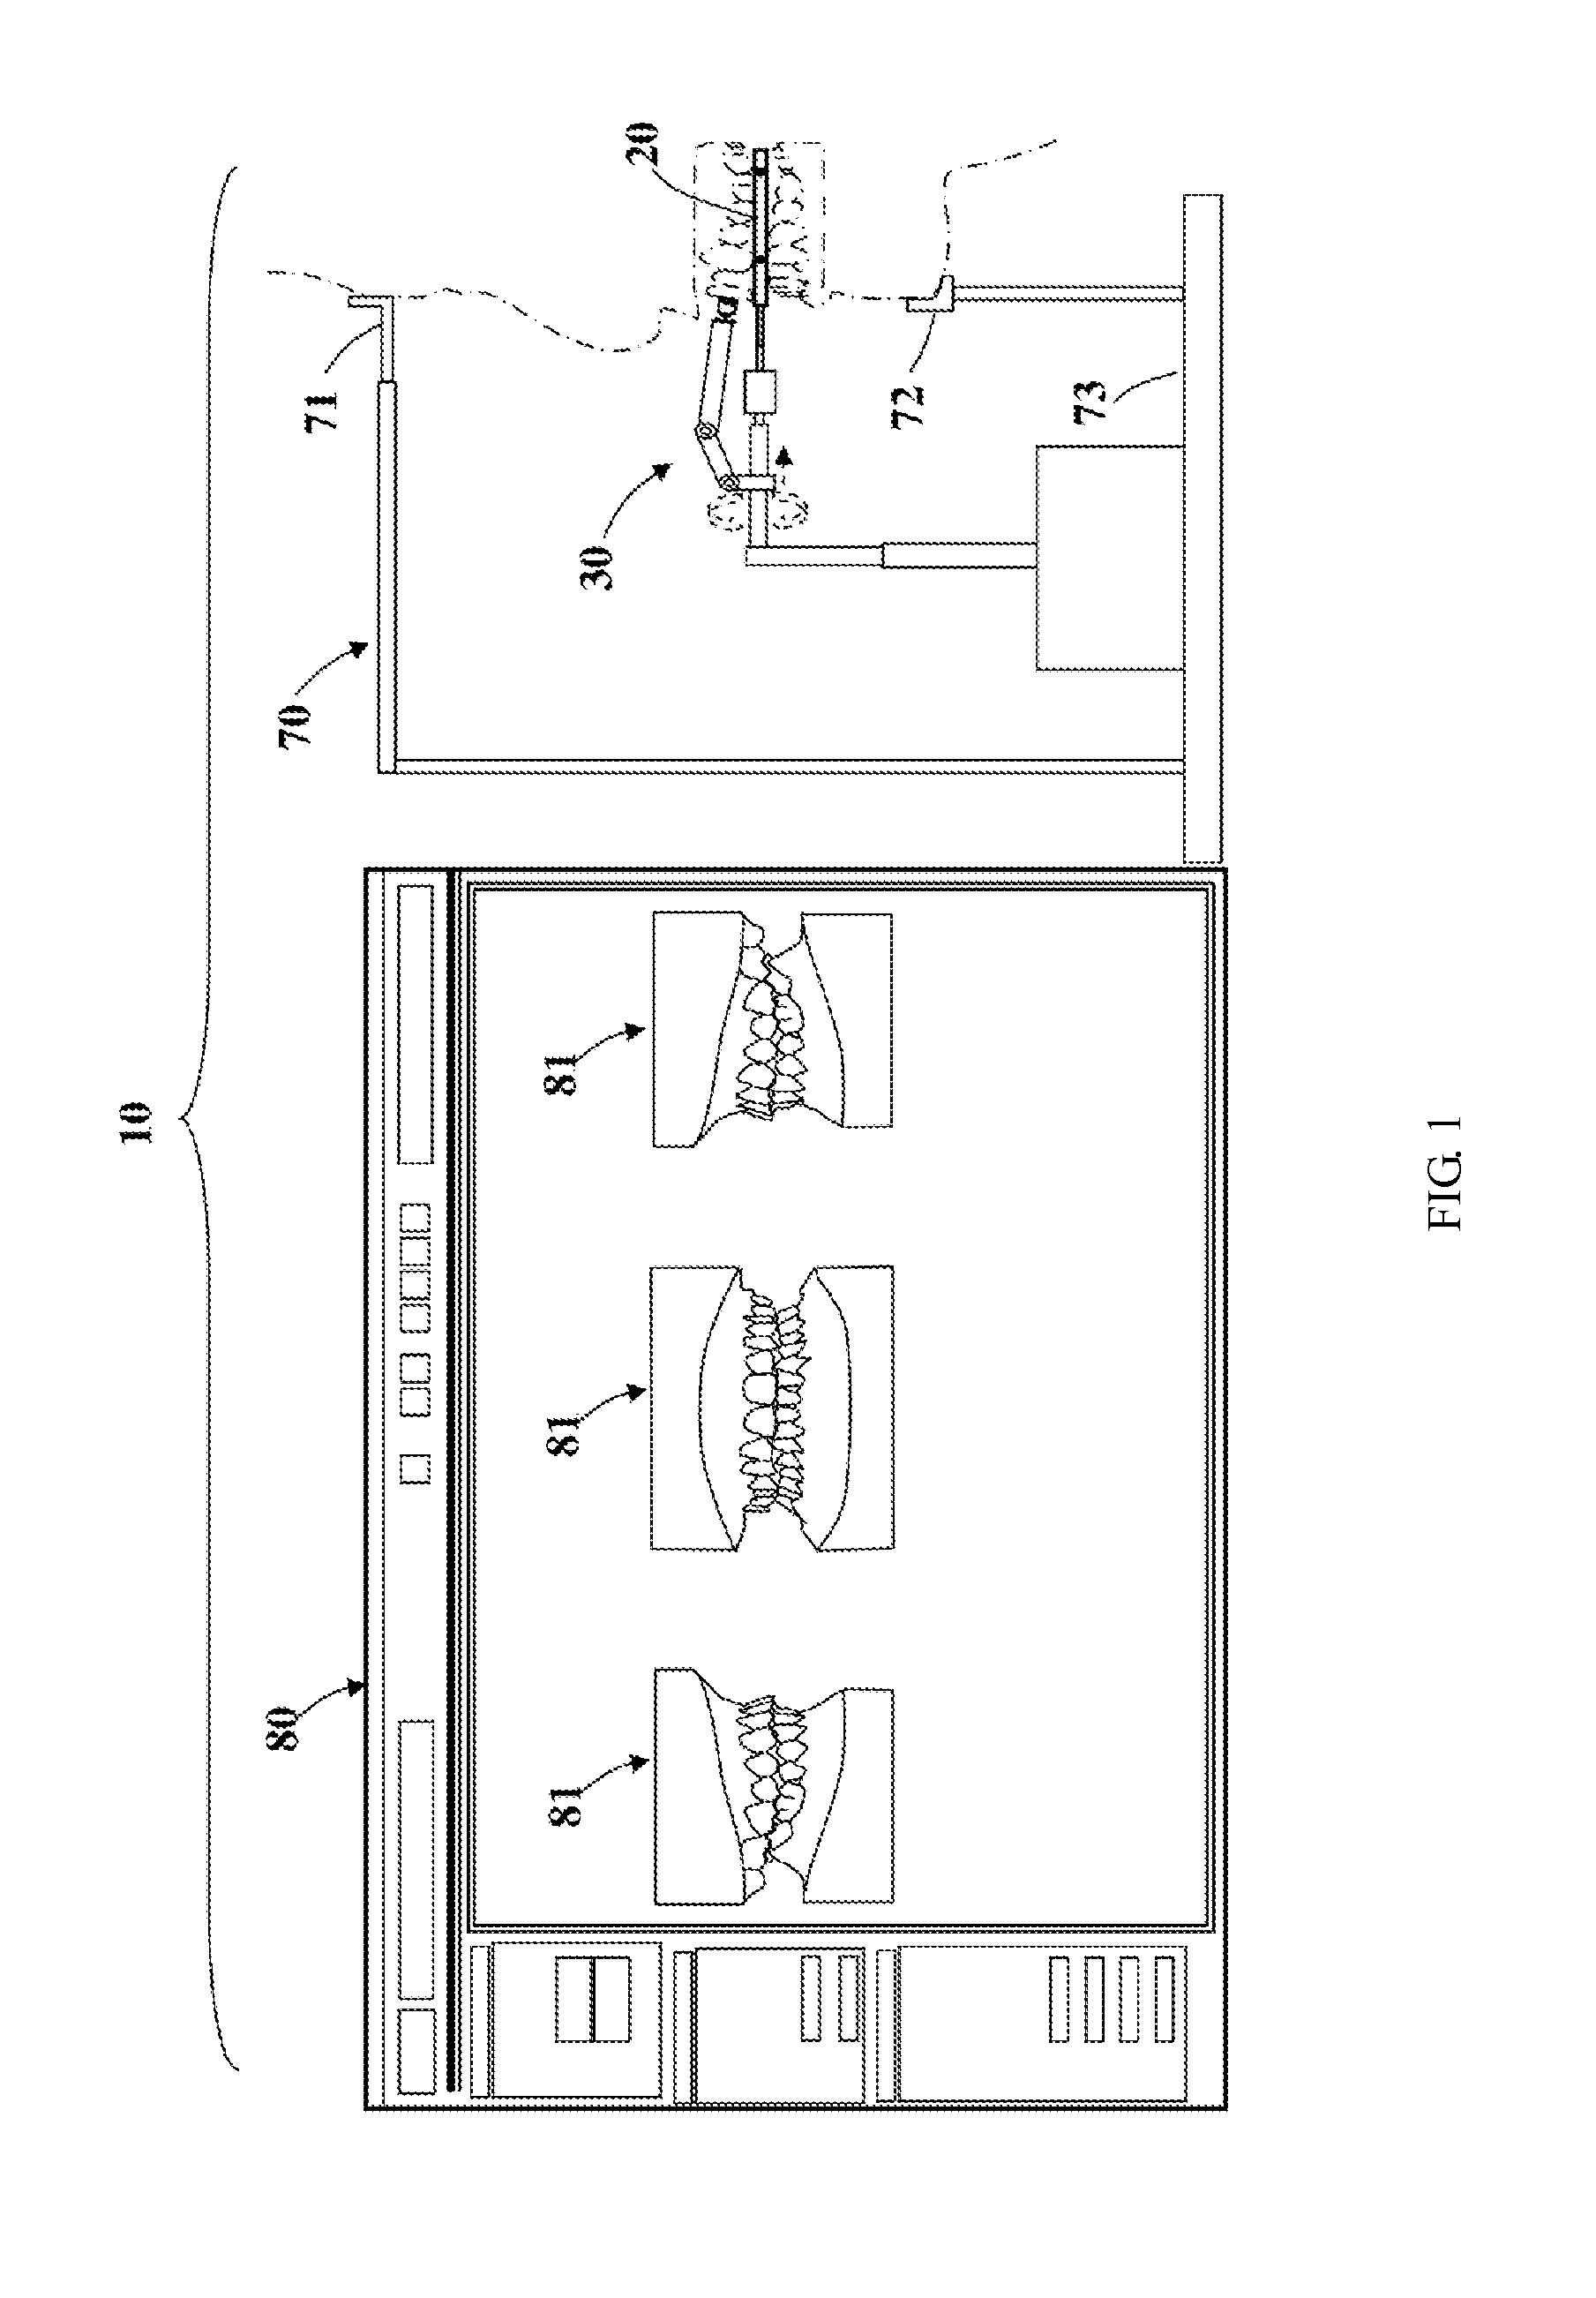 Automated orthodontic bracket positioning system and method